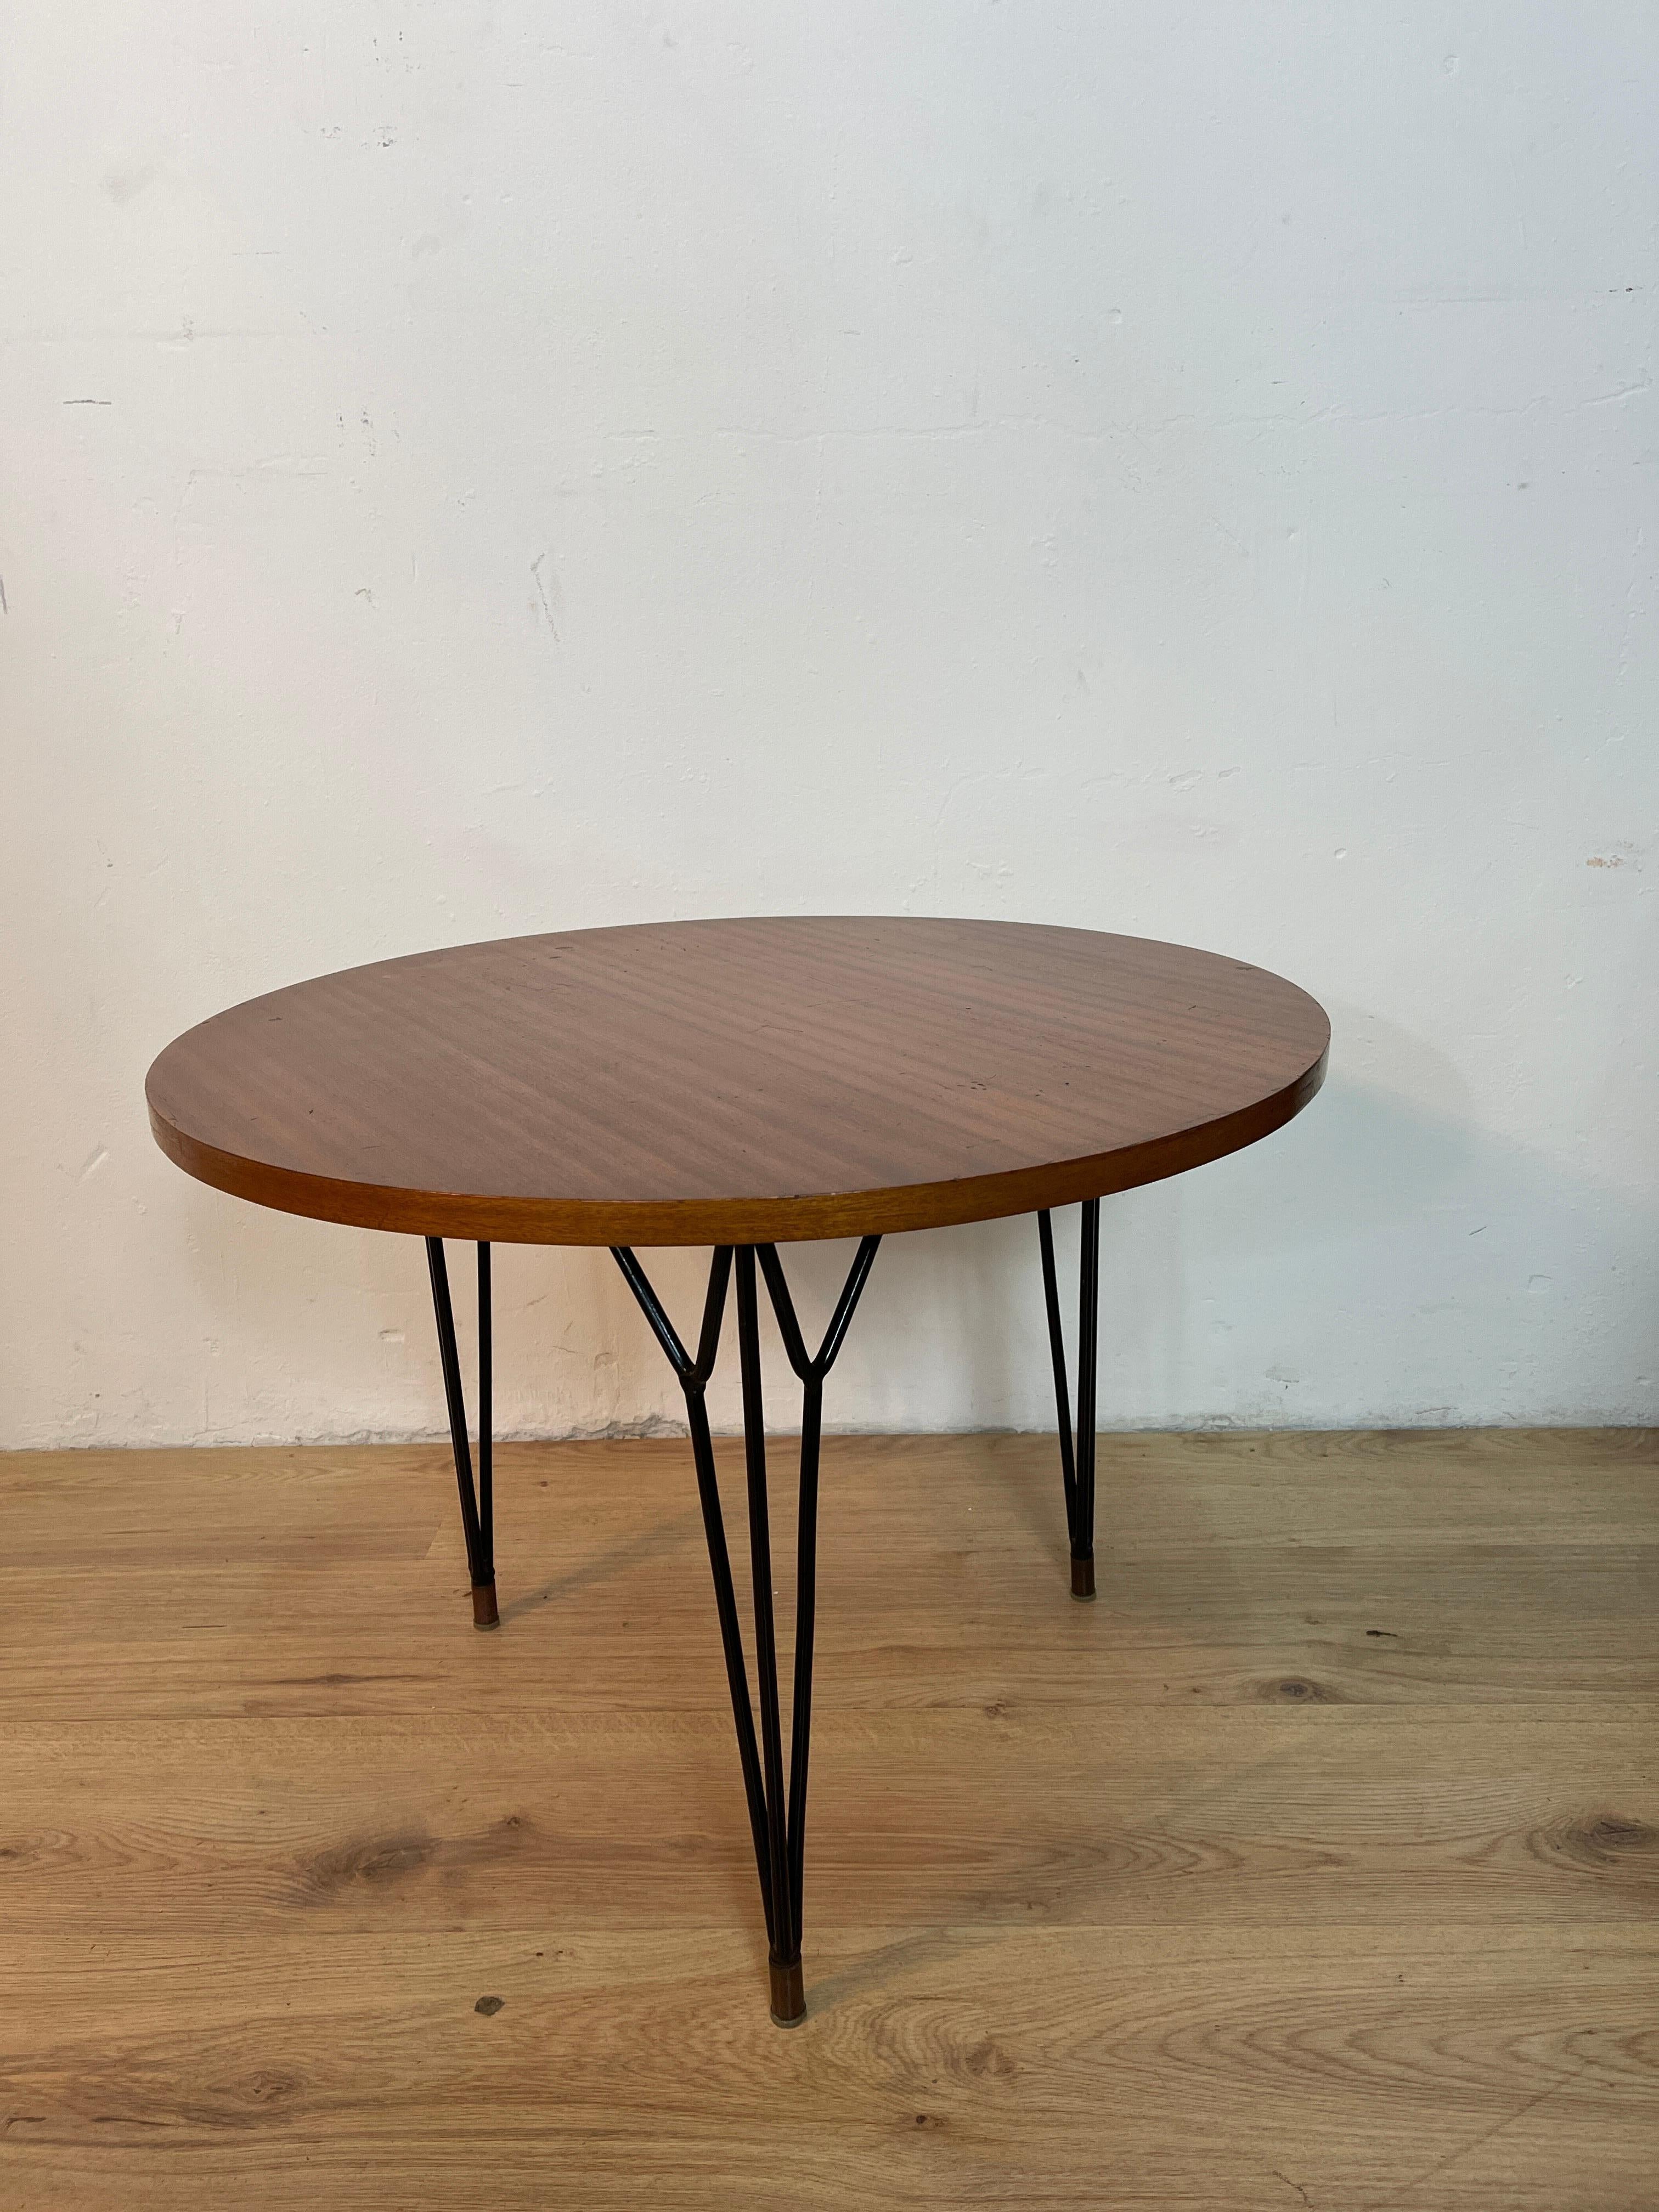 Round coffee table with 3 stylized black metal feet and wooden top, a design attributable to the work of the designer Giò Ponti.